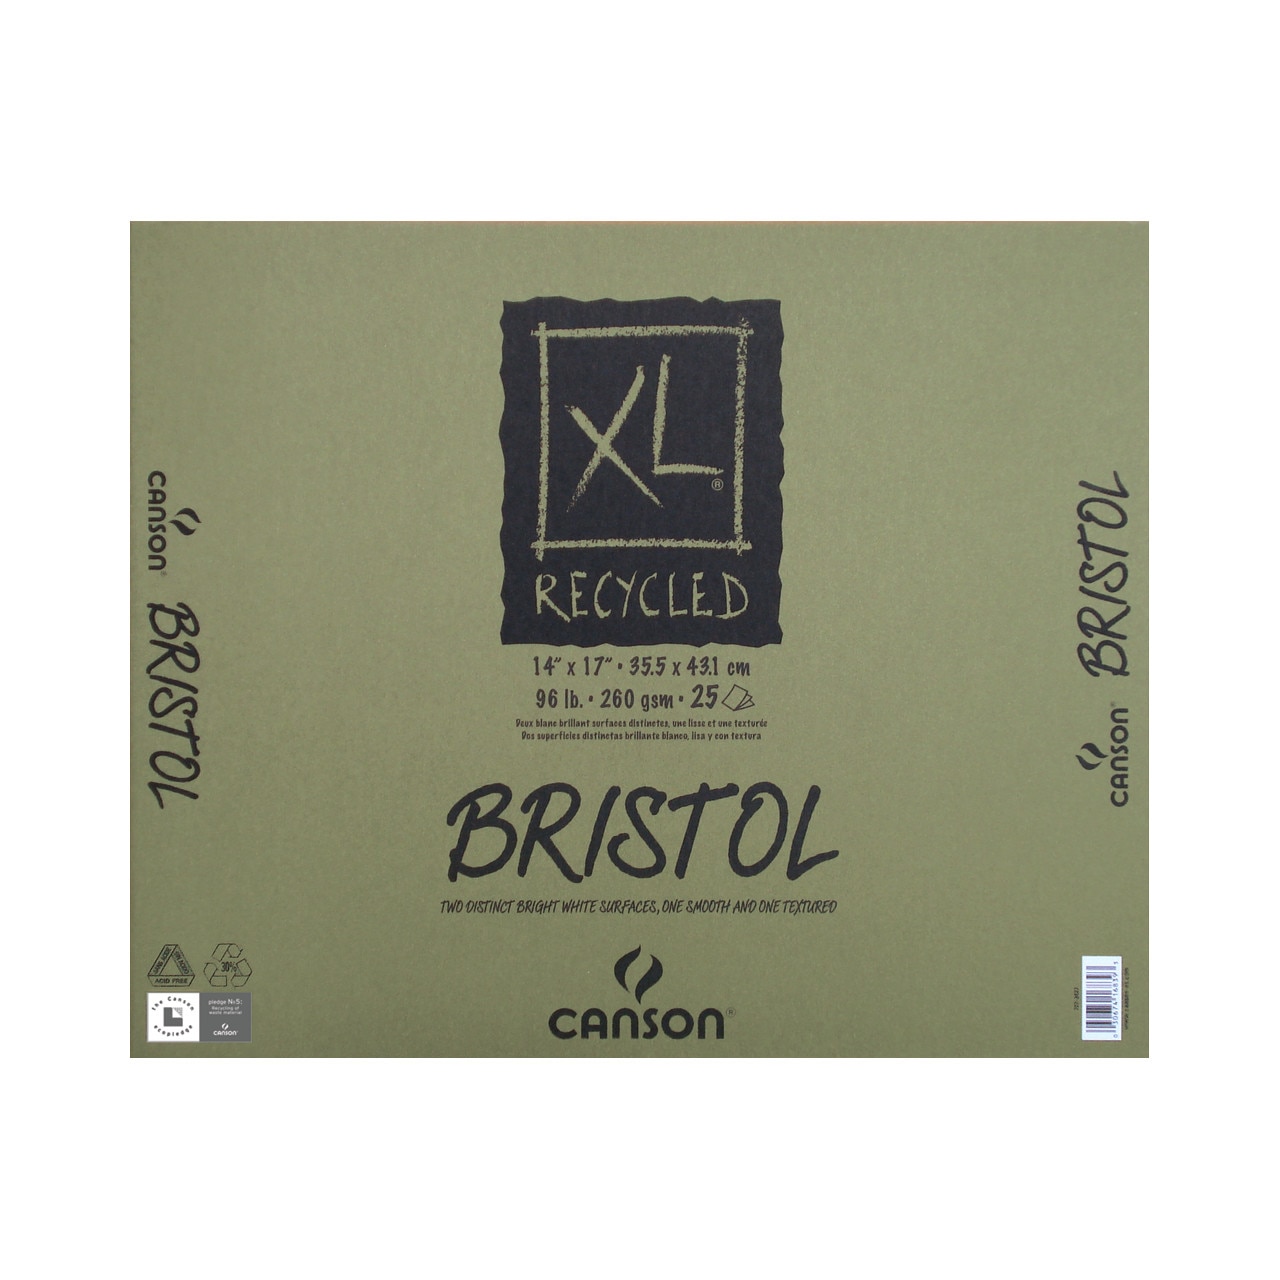 Canson XL Recycled Bristol Pad, 25 Sheets, 14" x 17"